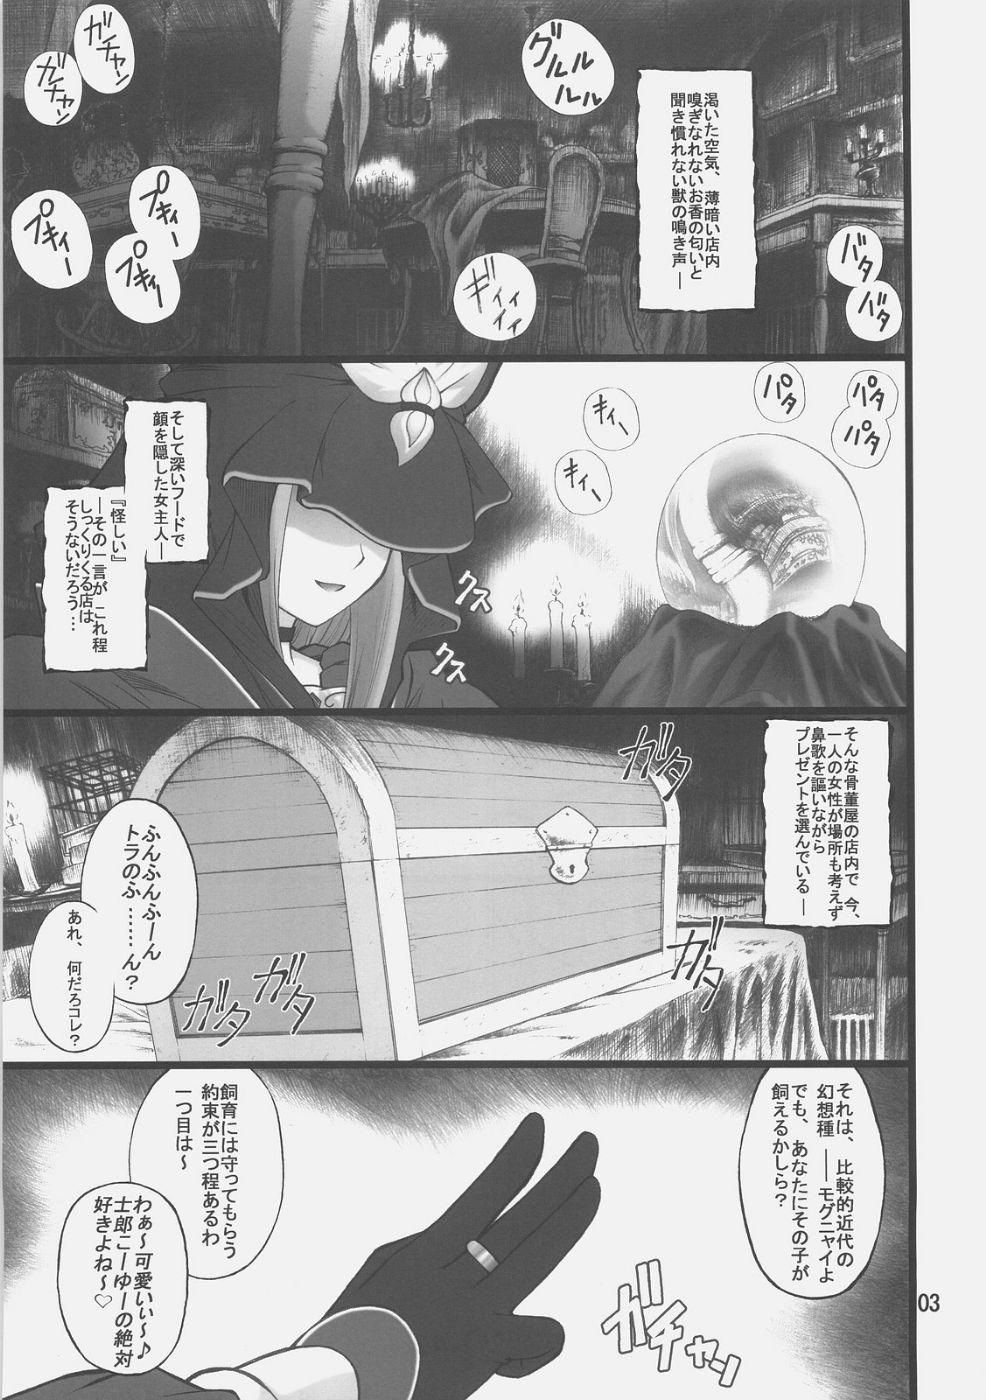 Russia Grem-Rin 1 - Fate stay night Cum Swallow - Page 2